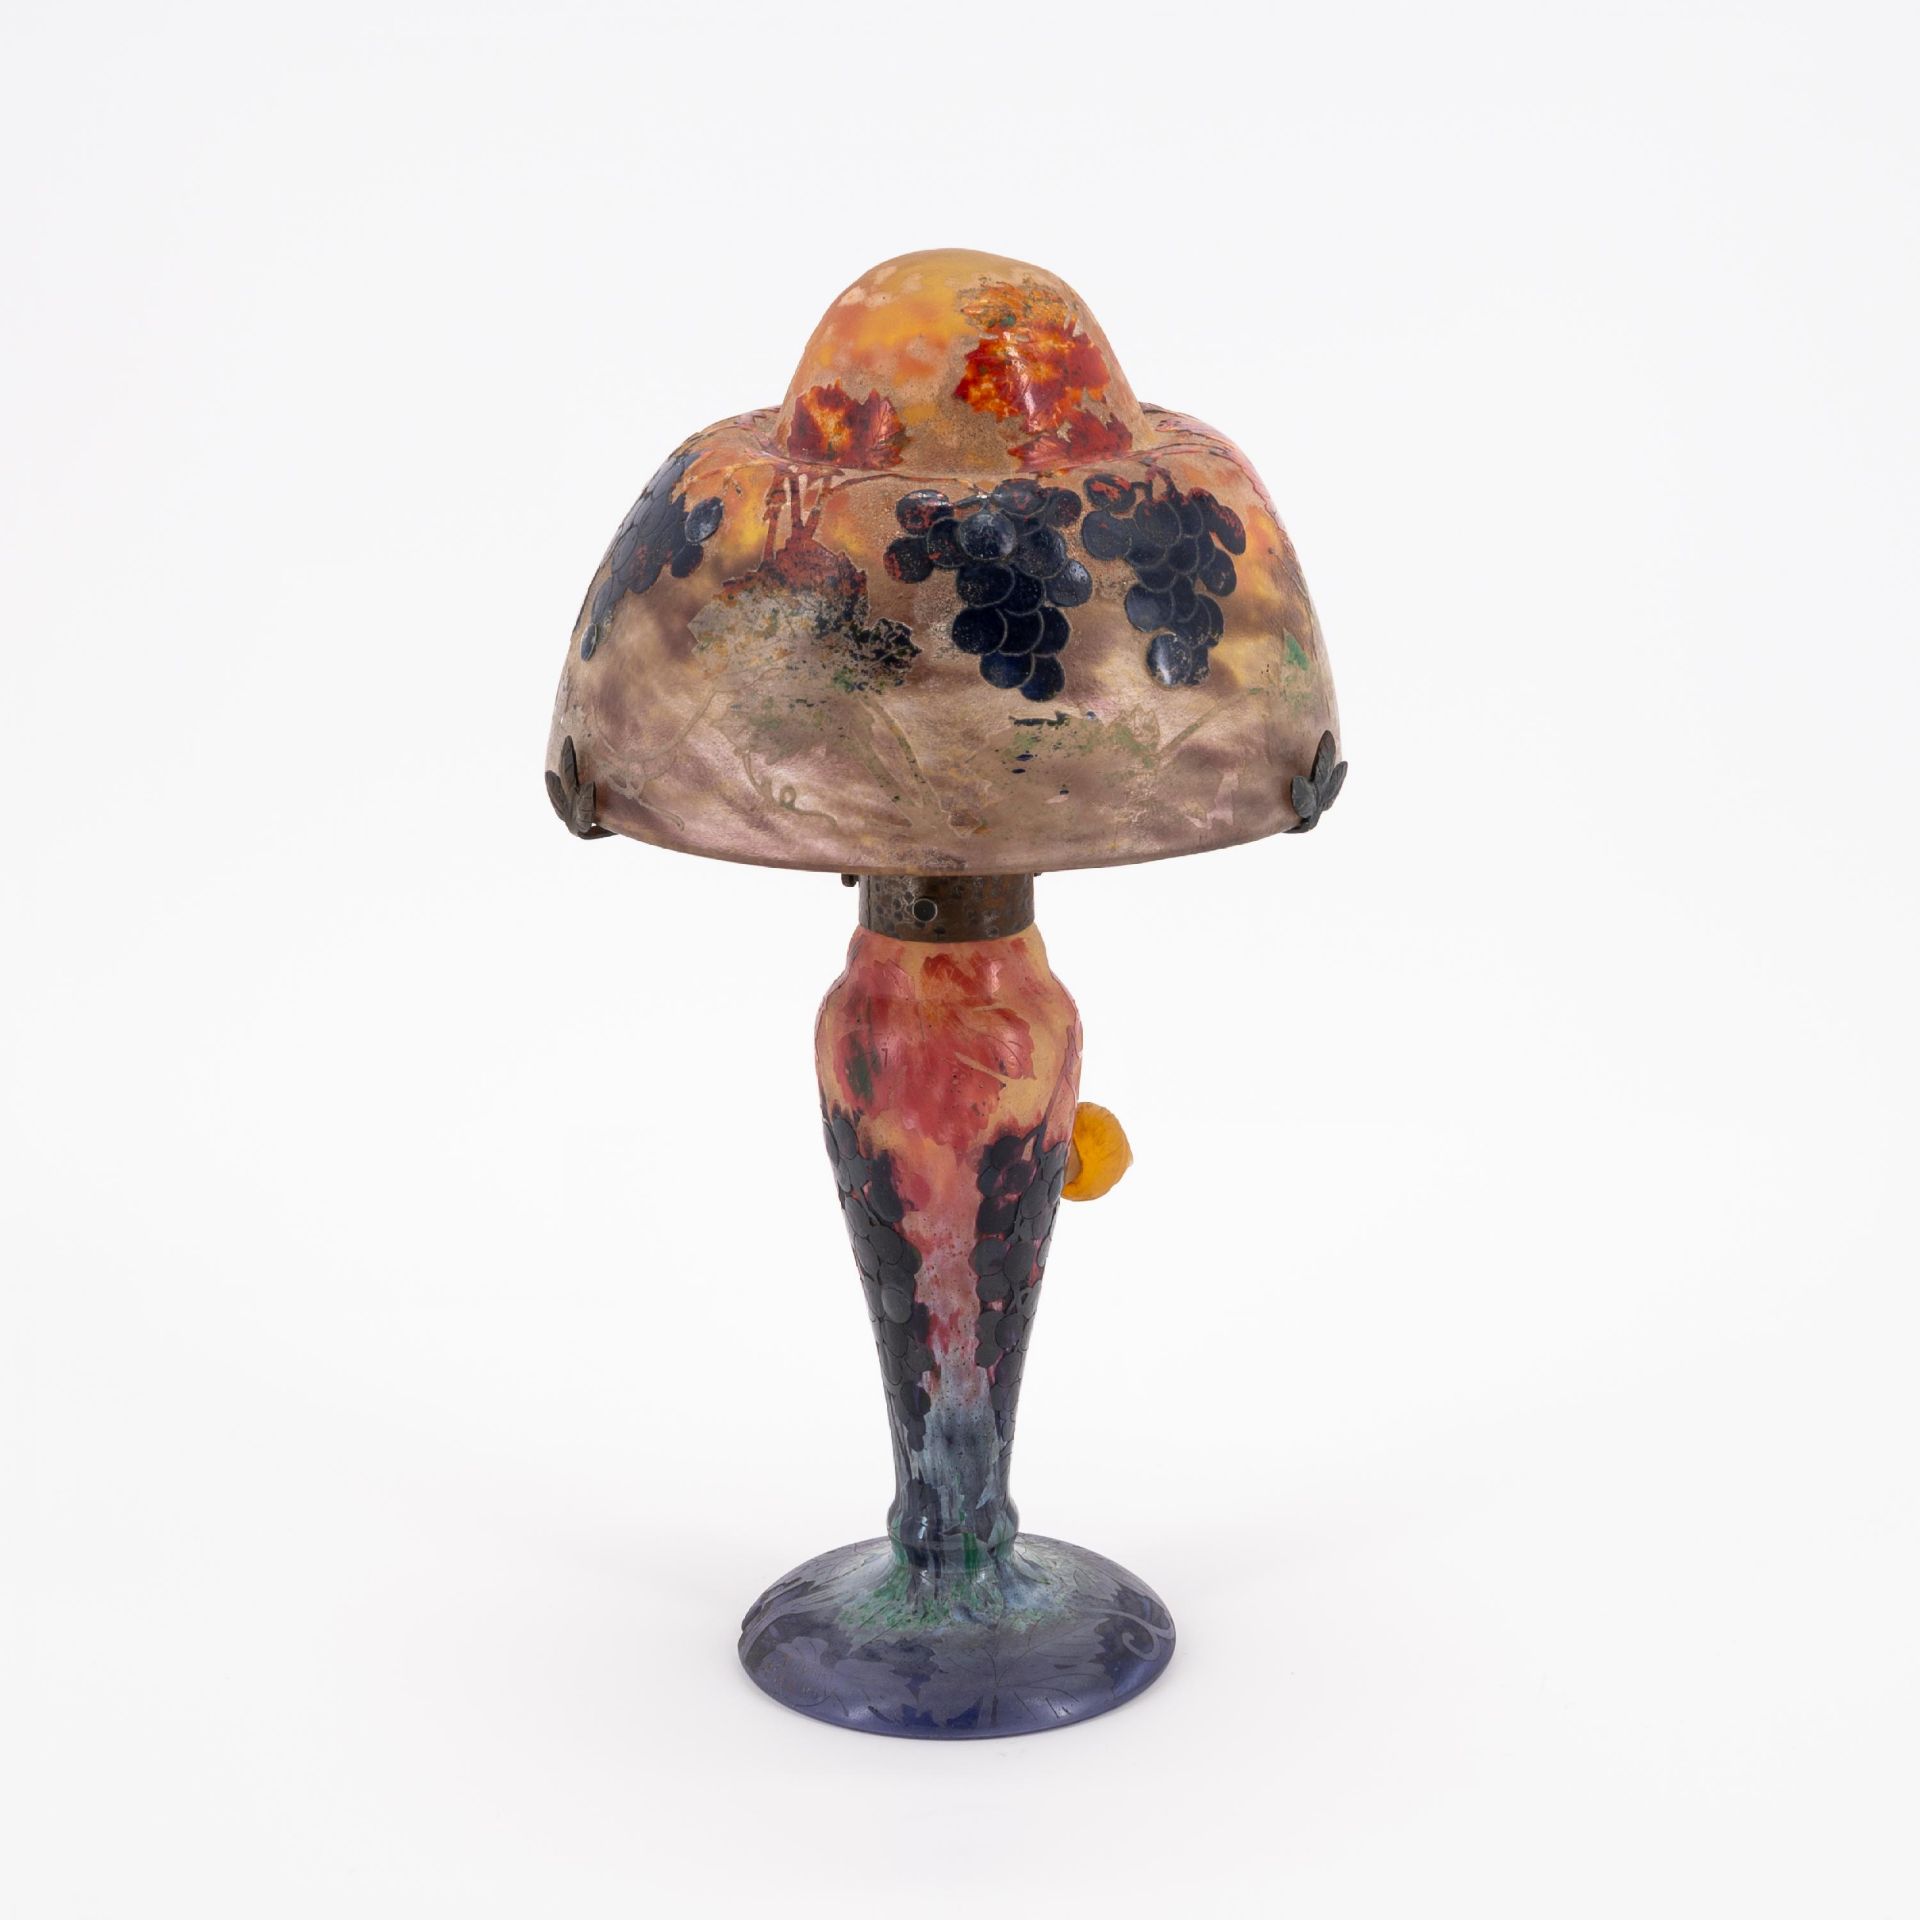 RARE GLASS TABLE LAMP 'VIGNE ET ESCARGOTS' WITH A SNAIL - Image 4 of 10